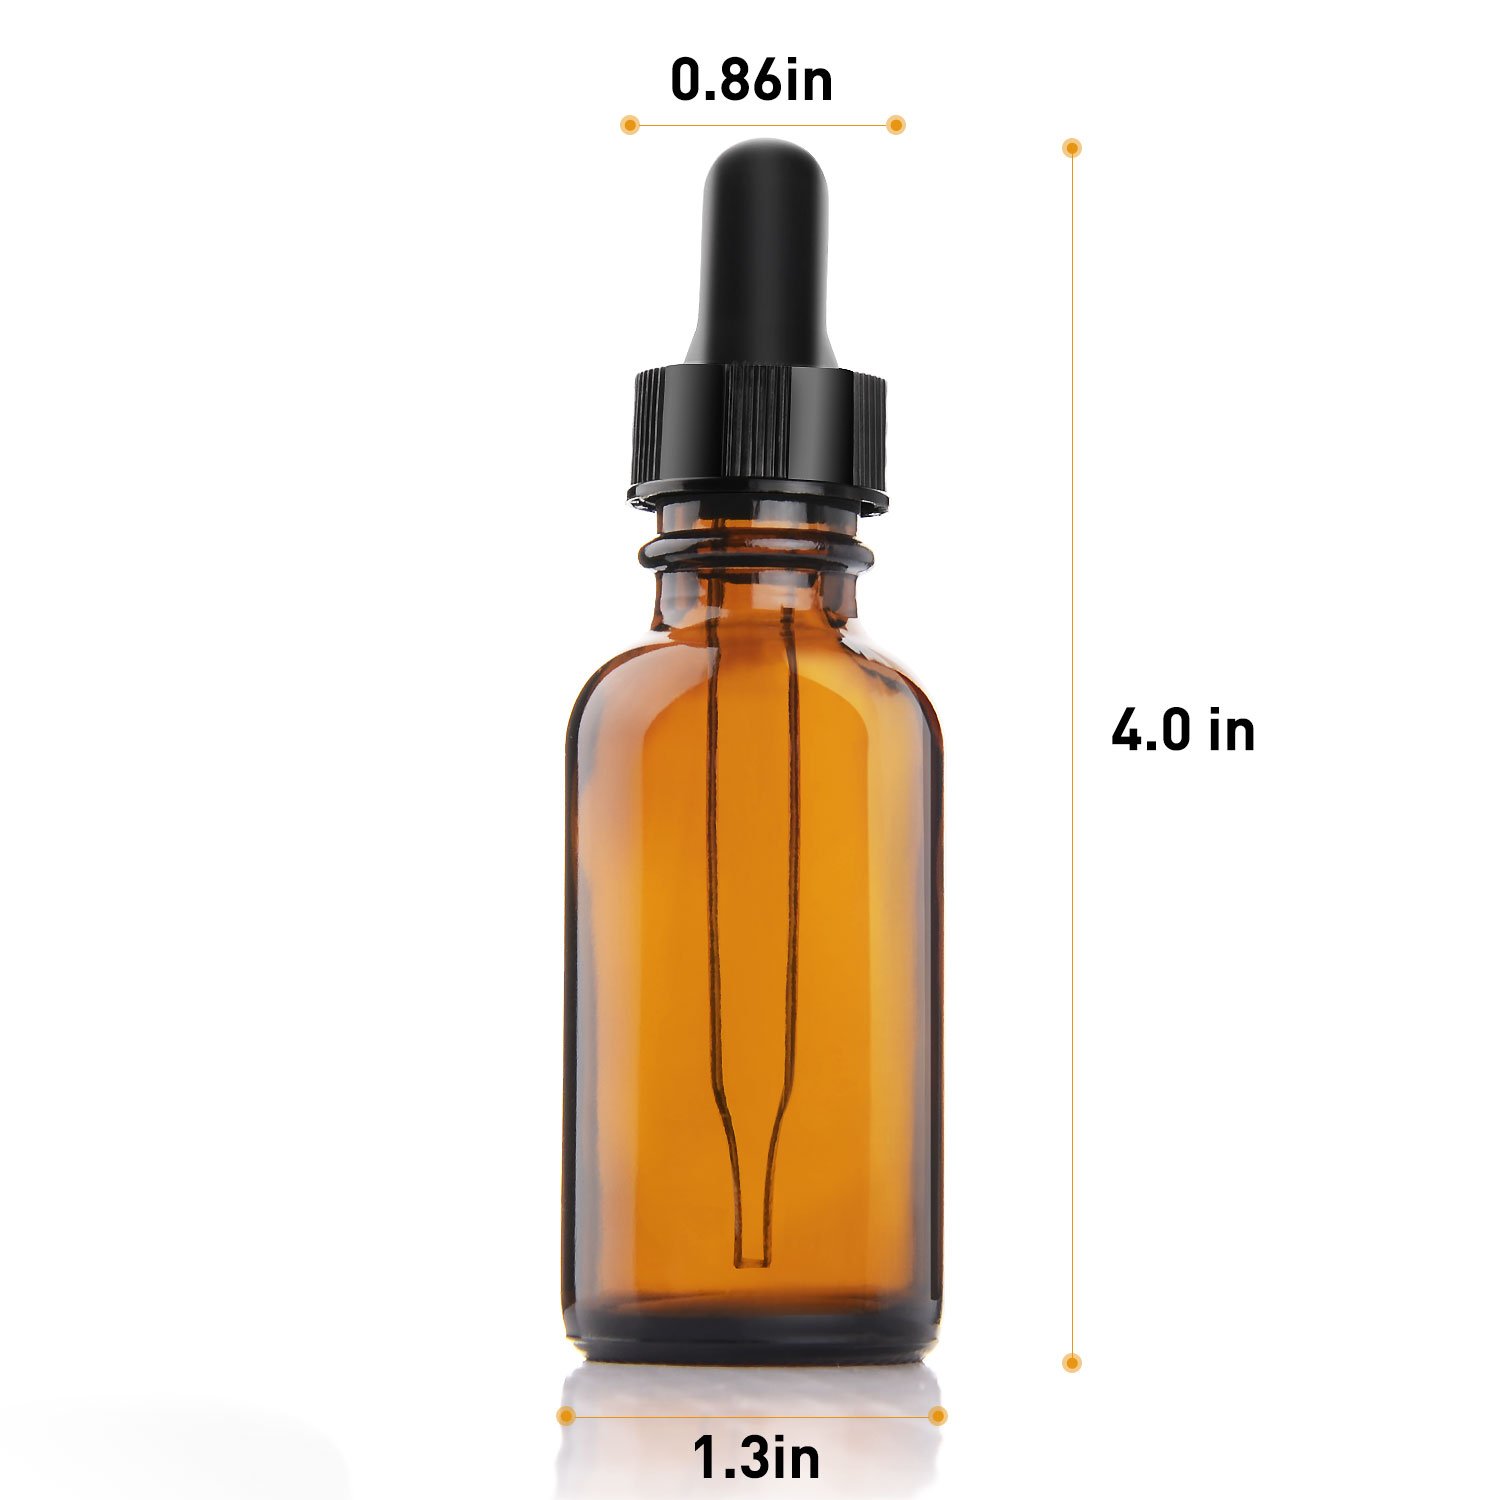 Yesker Amber Glass Bottles for Essential Oils with Glass Eye Dropper 30 ml (1oz) for Essential Oils, Chemistry Lab Chemicals, Colognes & Perfumes- Pack of 6